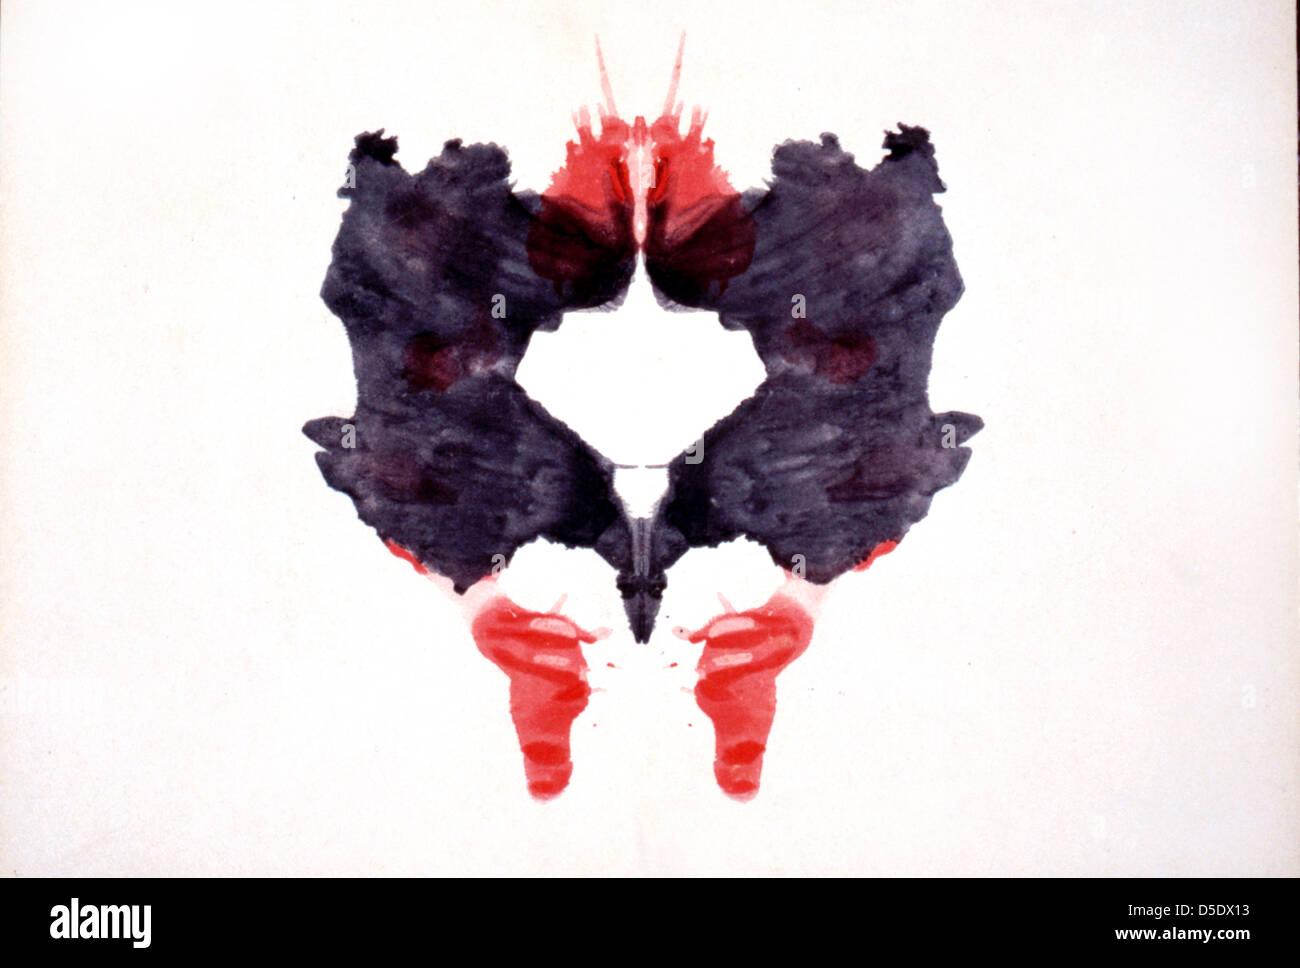 A Rorschach inkblot test image. It is a psychological test in which subjects' perceptions of inkblots are analyzed. Stock Photo